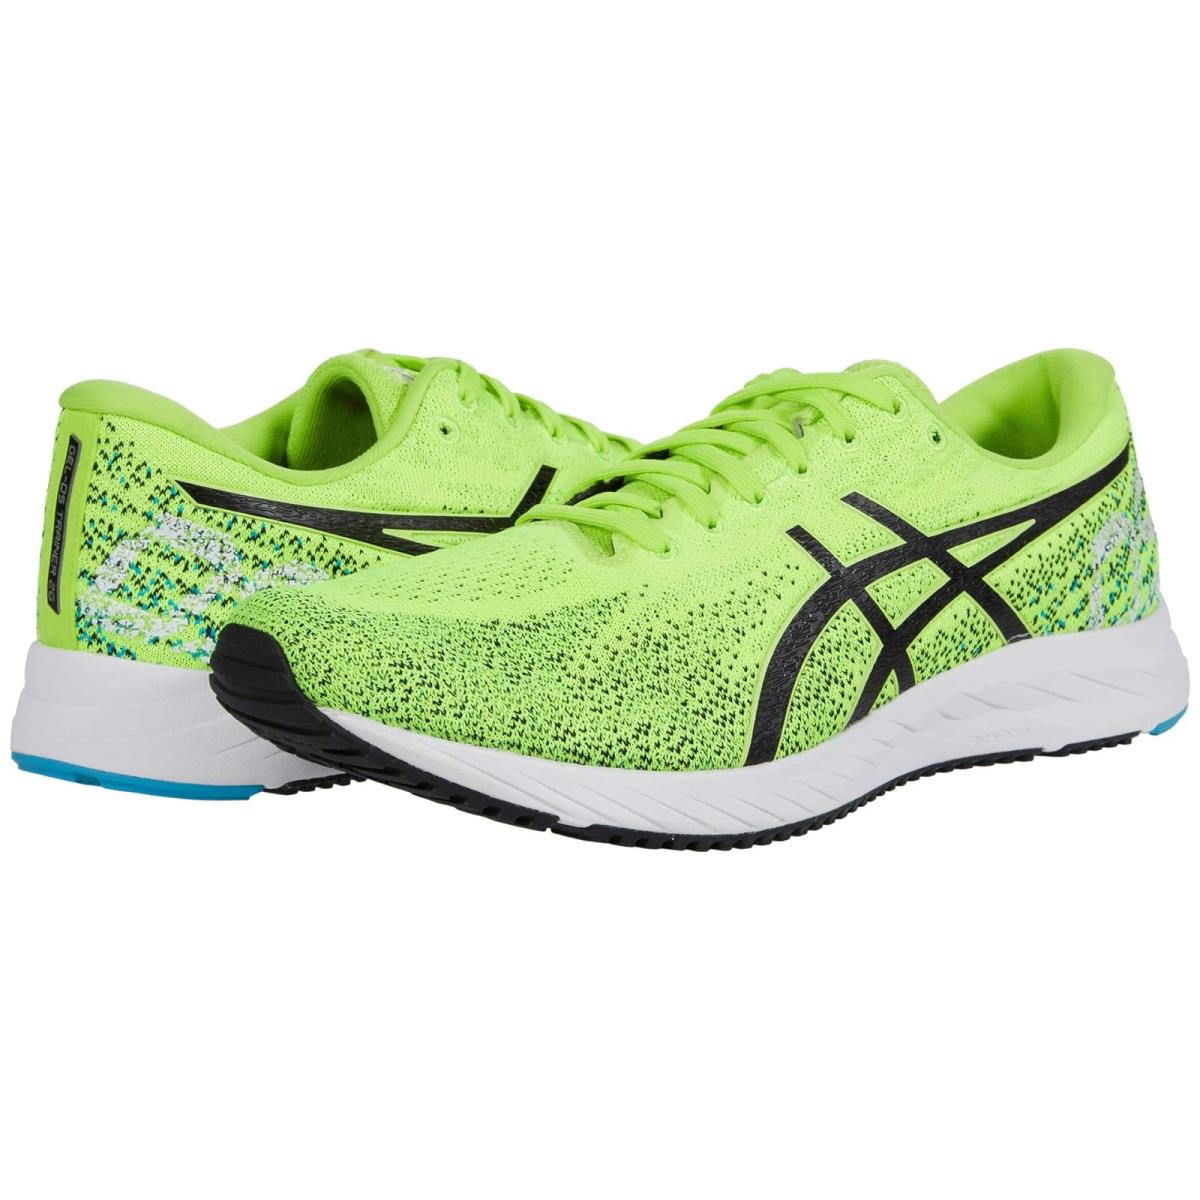 Man`s Sneakers Athletic Shoes Asics Gel-ds Trainer 26 Hazard Green/Black